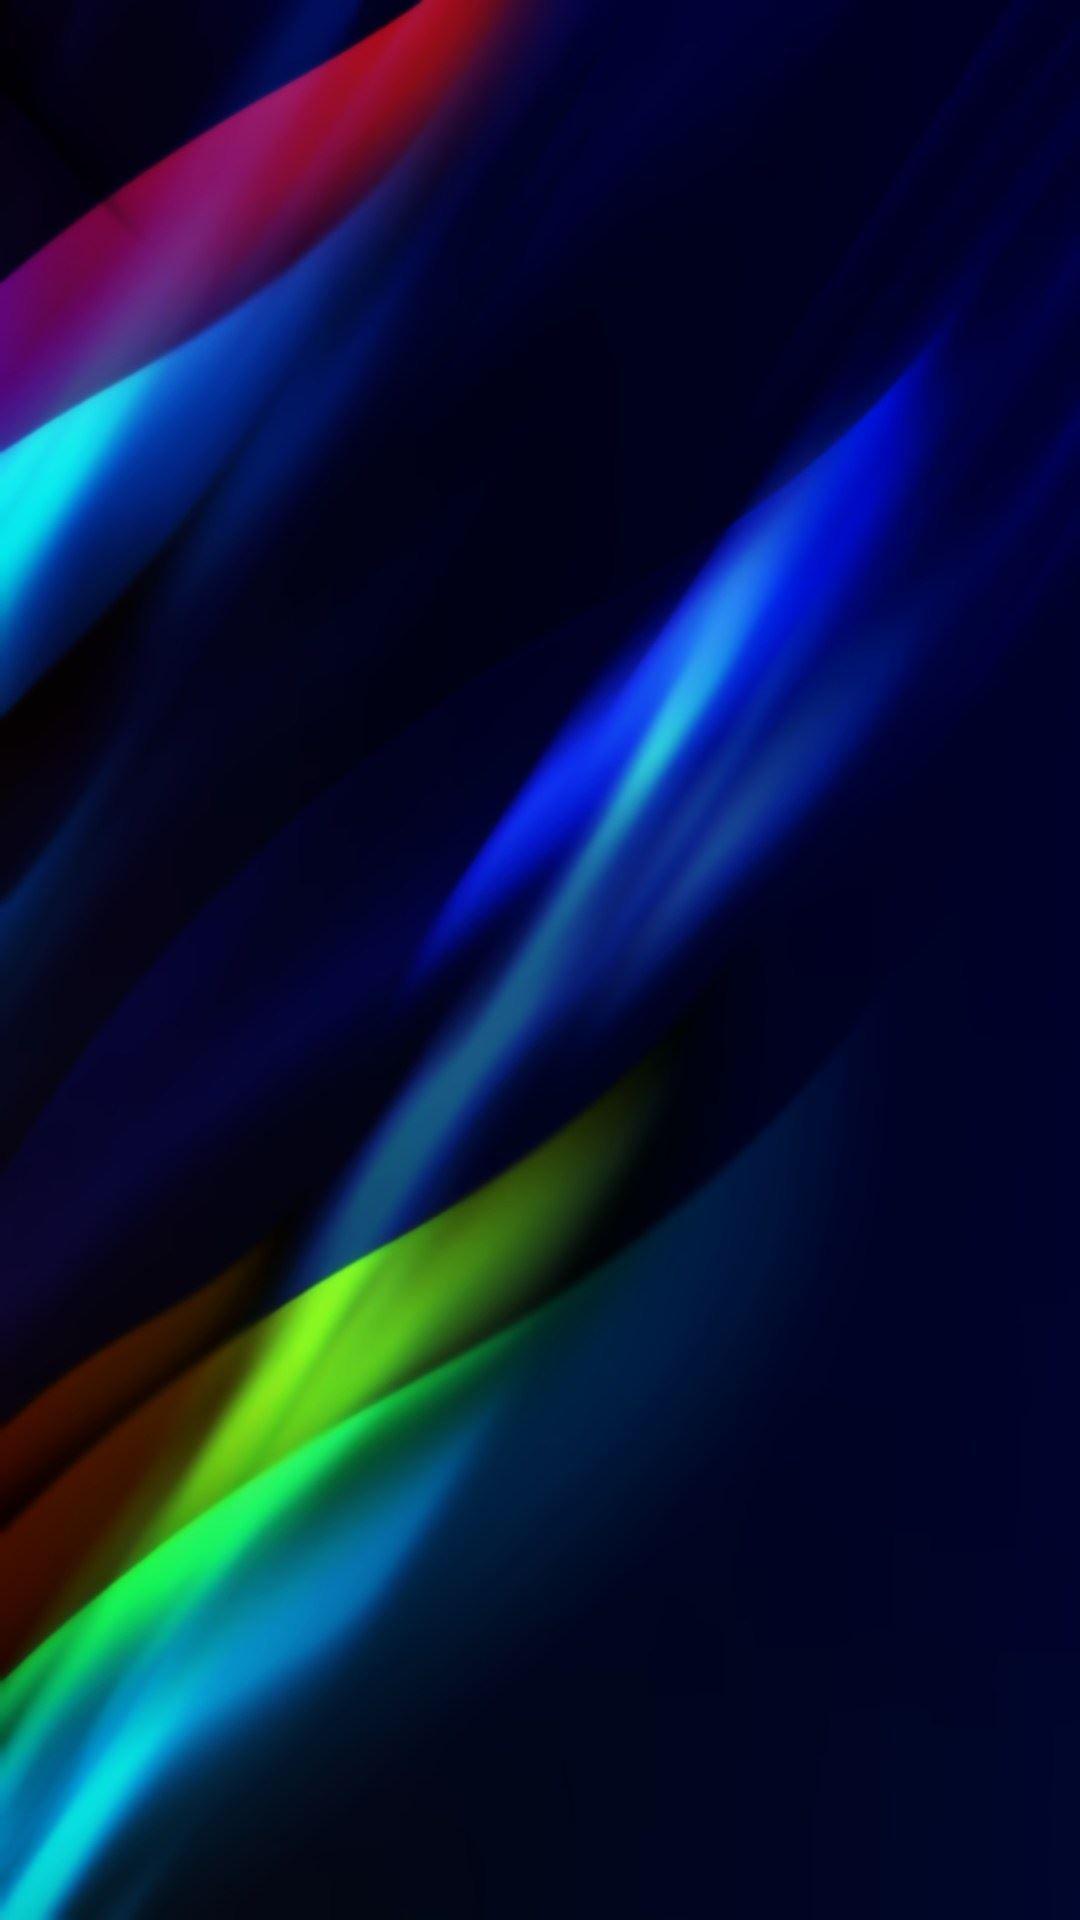 Abstract Ribbons Of Light Android Wallpapers free download